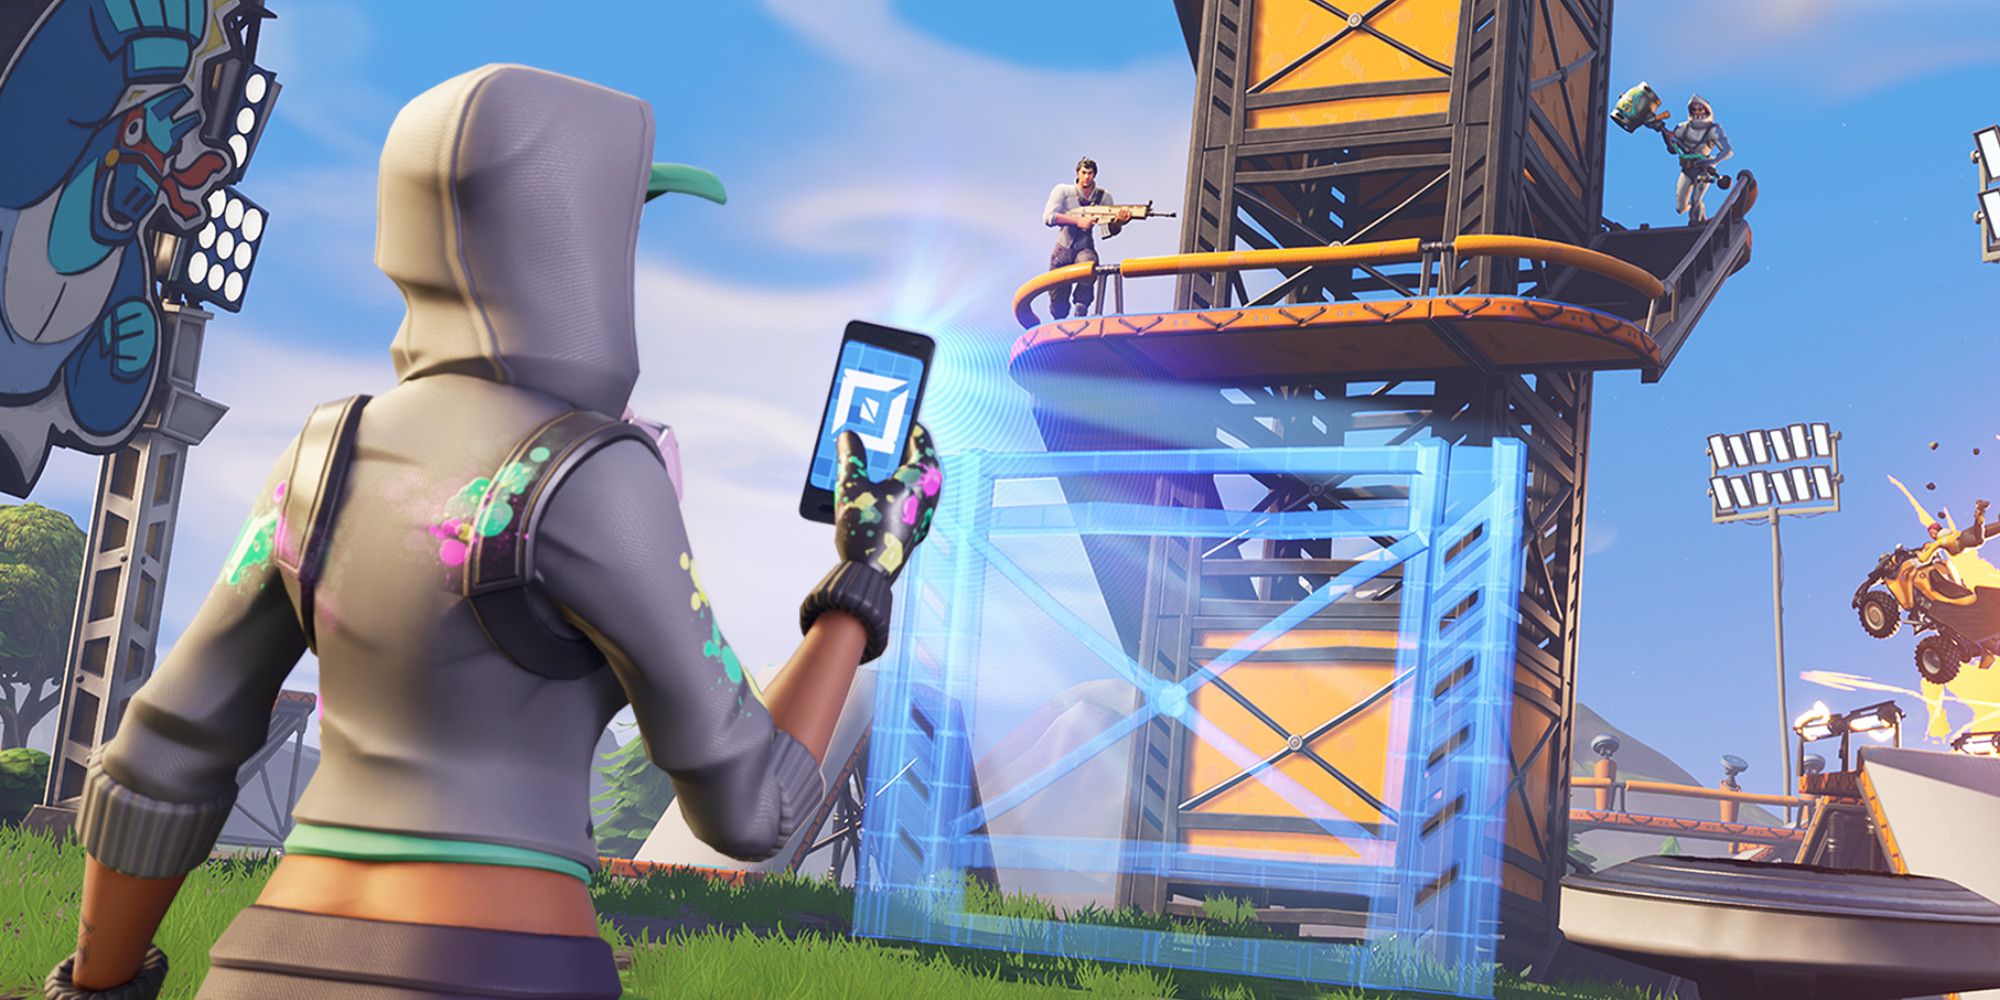 Fortnite character creating a tower with a mobile phone while two other characters run around a balcony on the tower